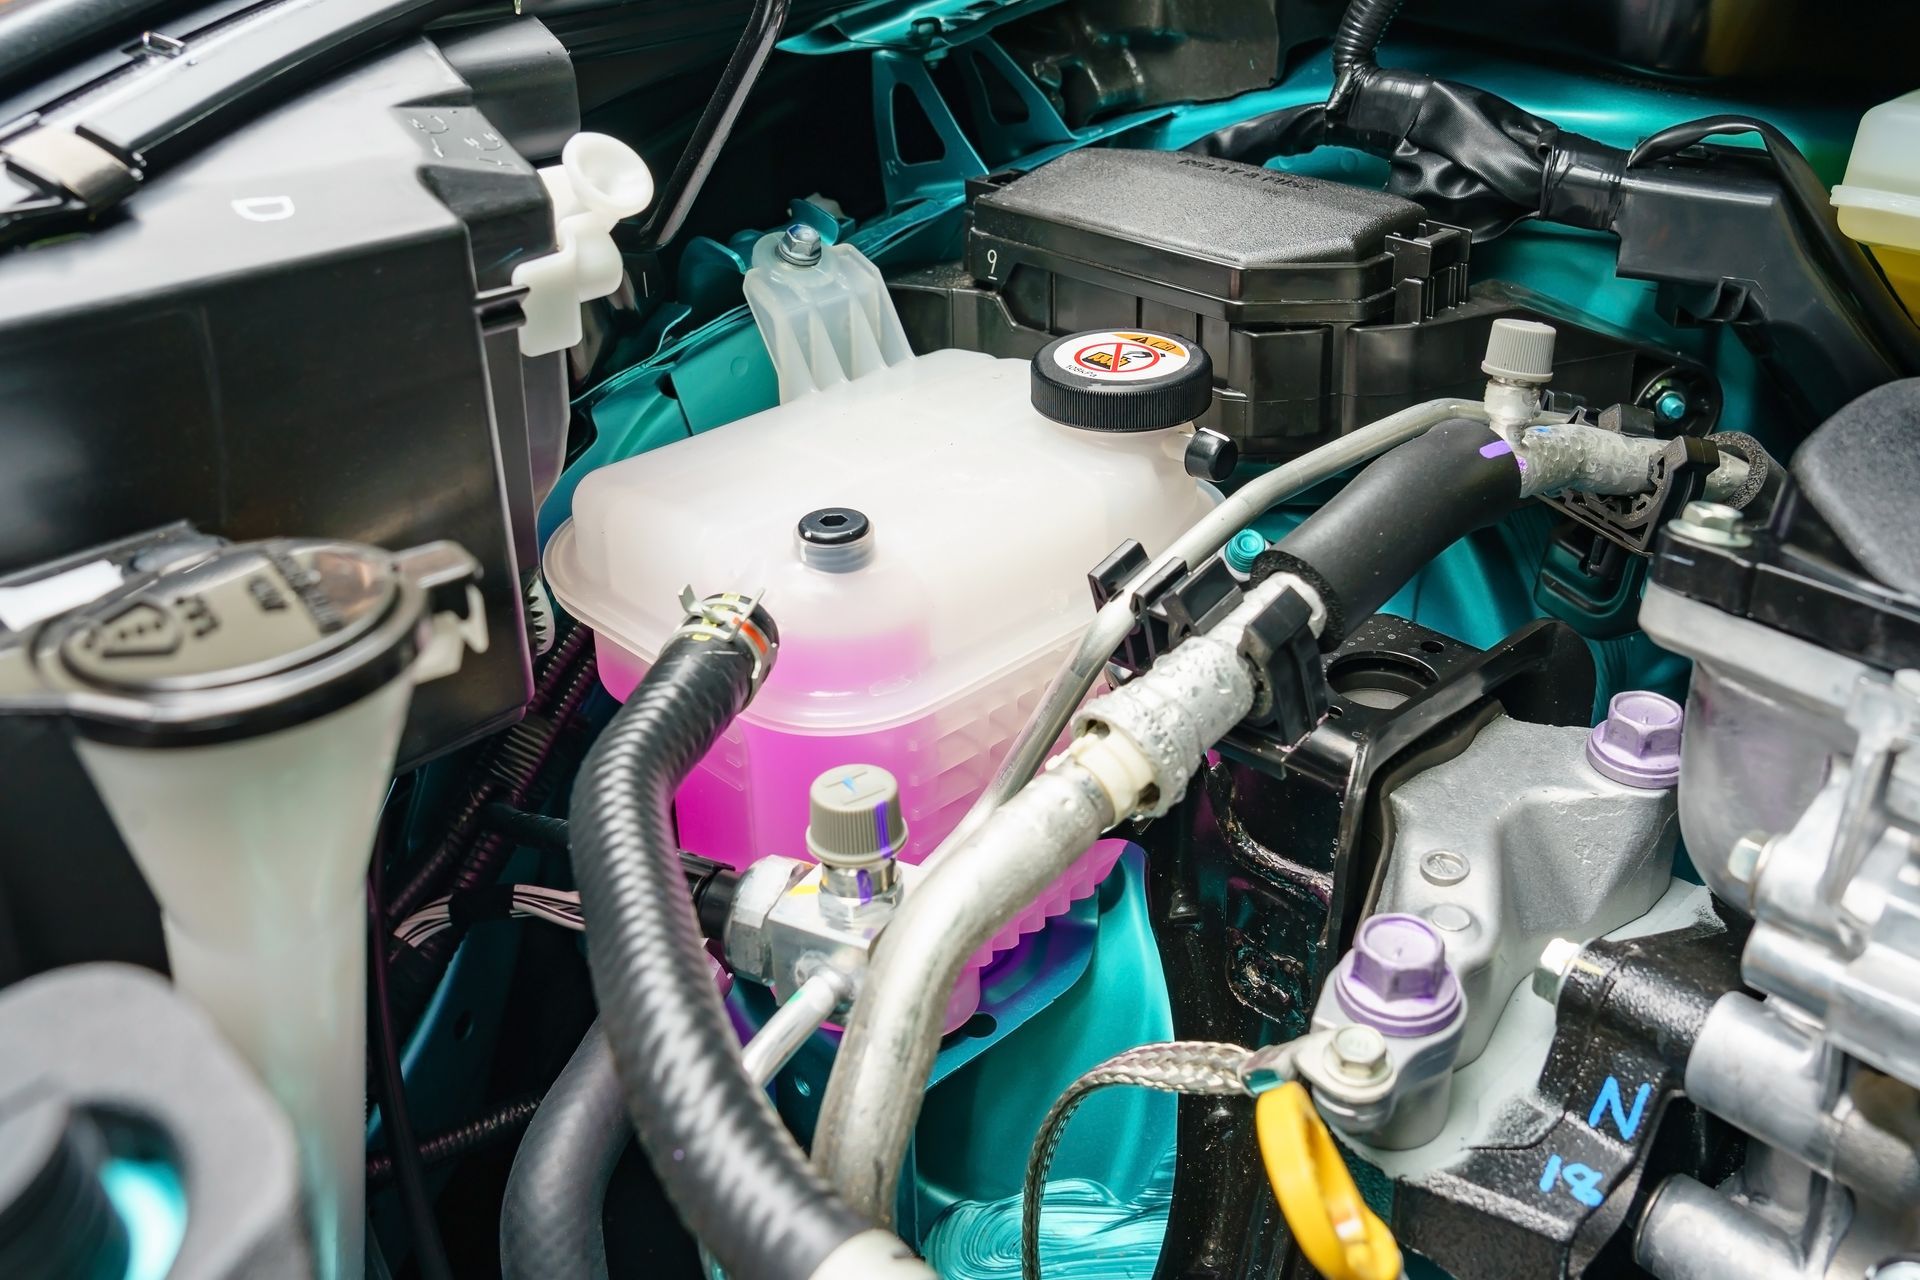 Cooling System Service at ﻿Turner & Osborne Complete Car Care﻿ in ﻿Columbia, TN﻿